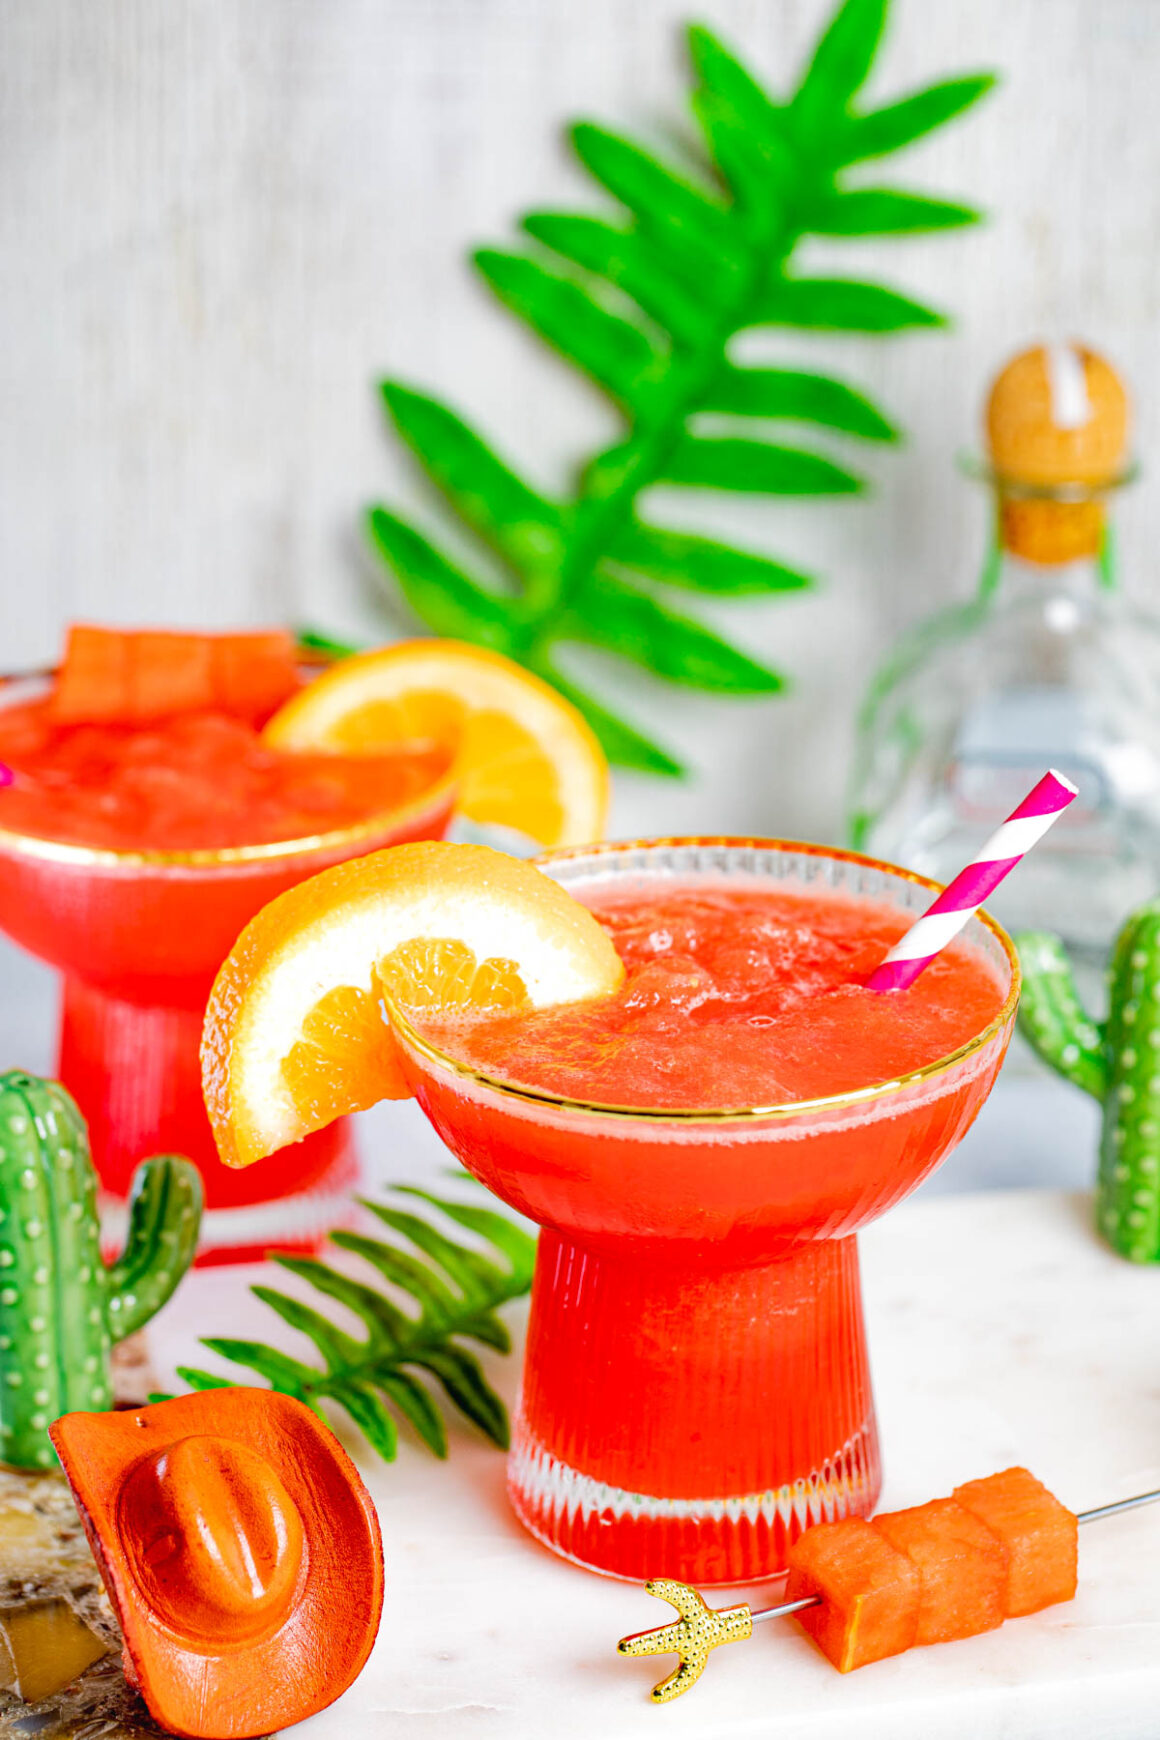 This tropical and refreshing Watermelon Margarita recipe is perfect for this summer that is just around the corner, enjoy its bright red color and its fresh flavor mixed with tequila to make the perfect match!